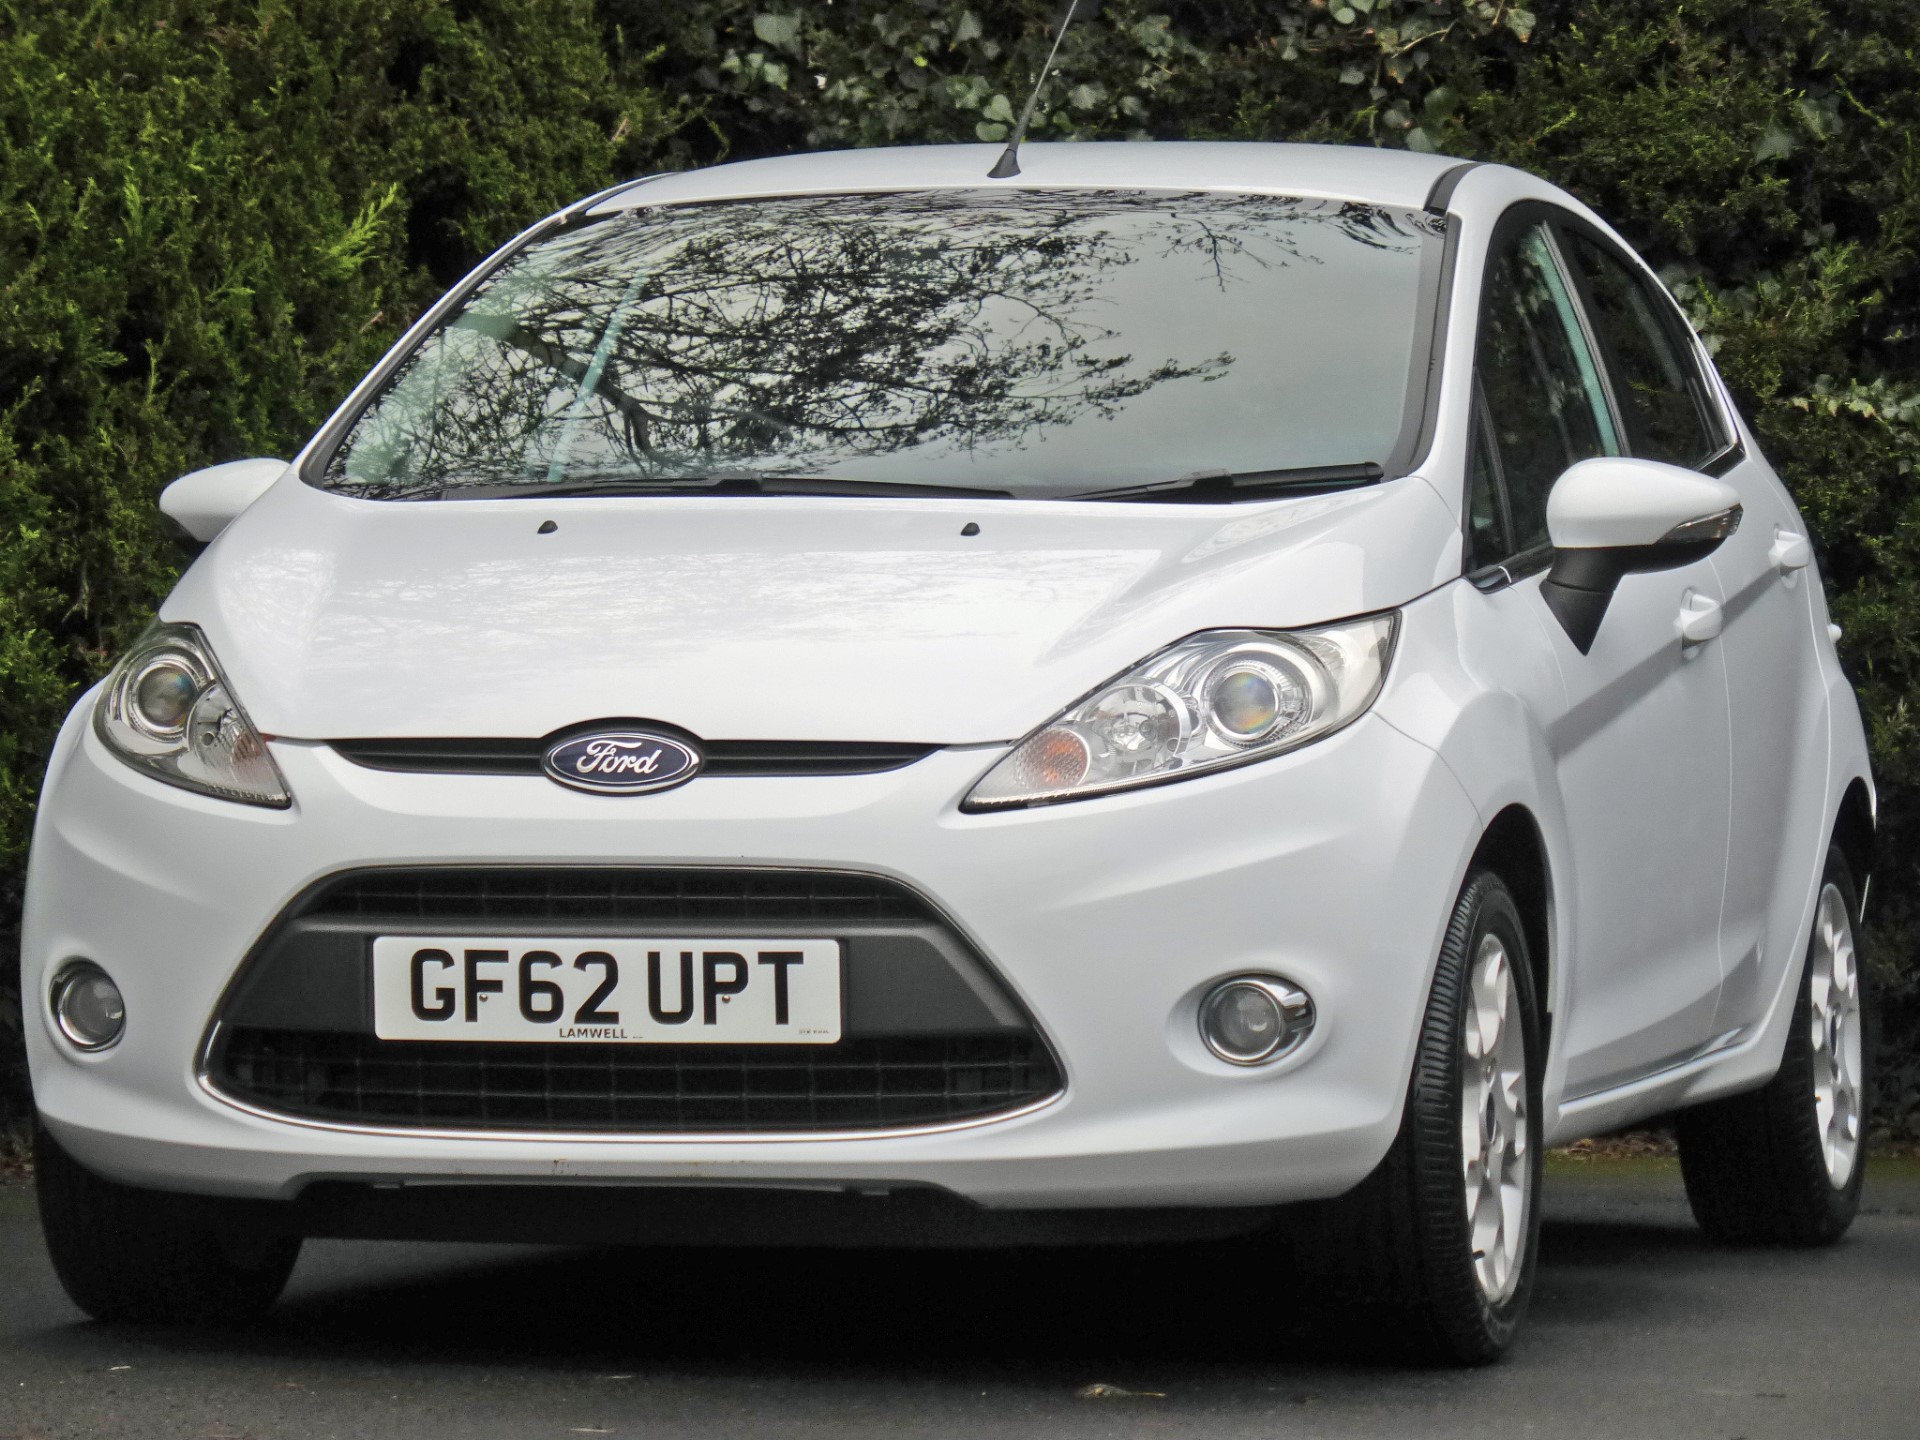 Used Ford Fiesta 2010 Petrol 1.2 White for sale in Dublin